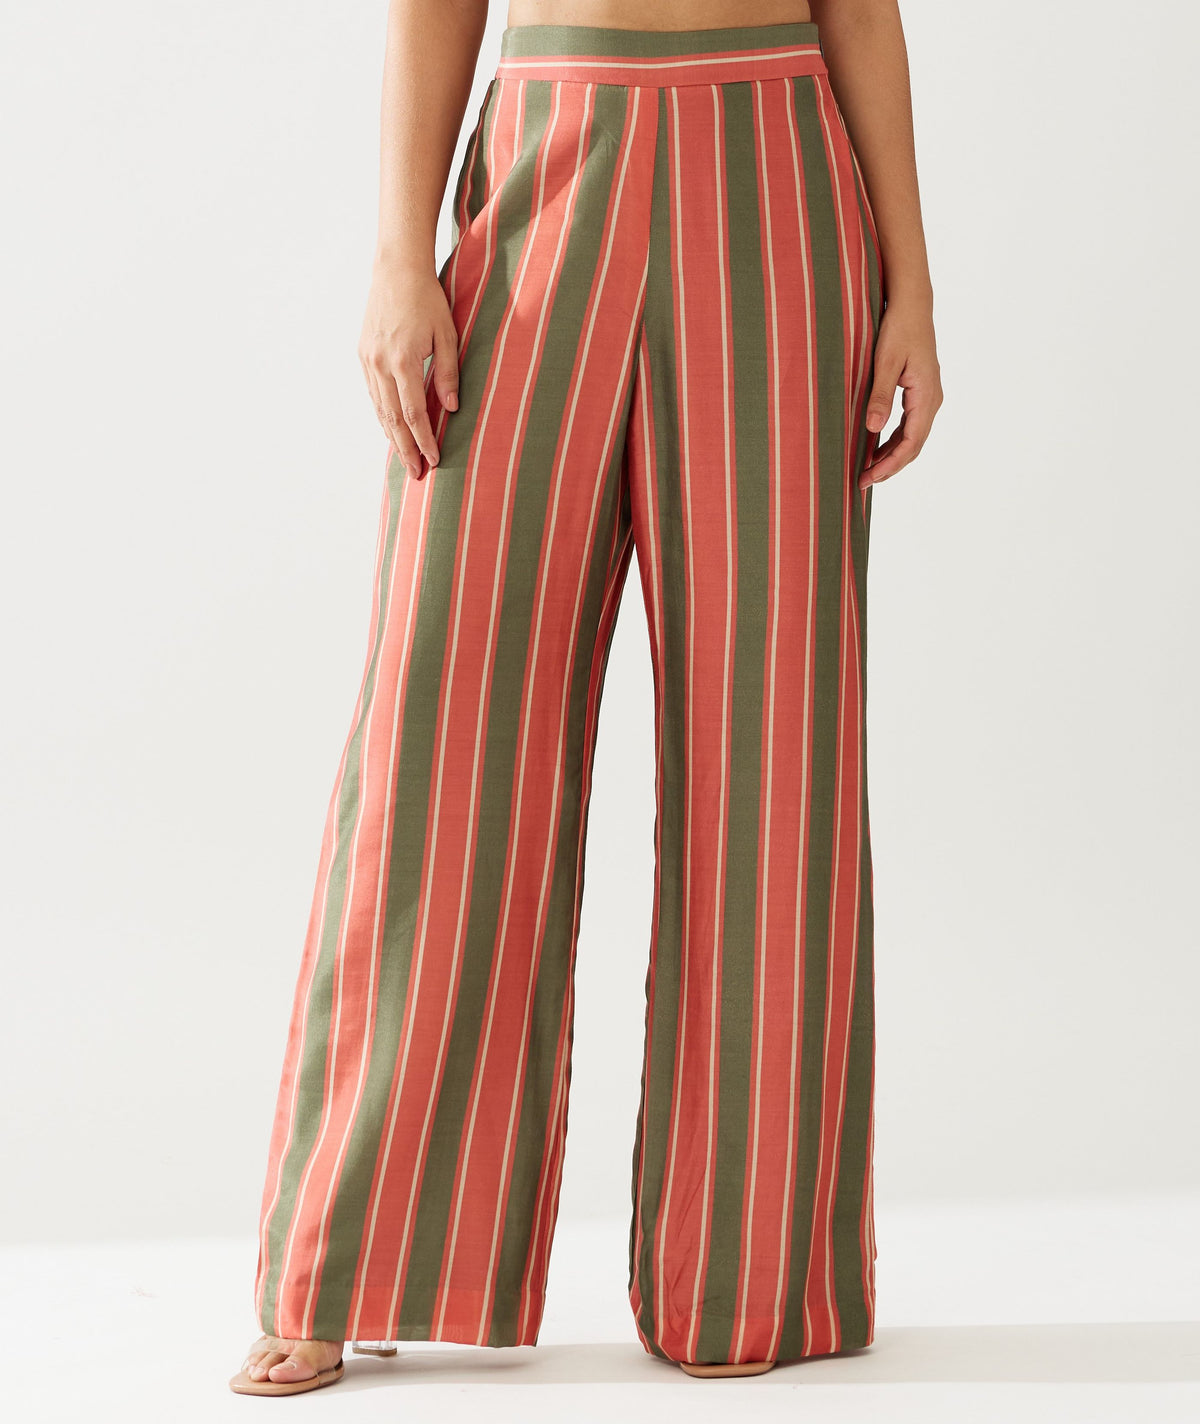 RED, GREEN AND CREAM STRIPE PANTS